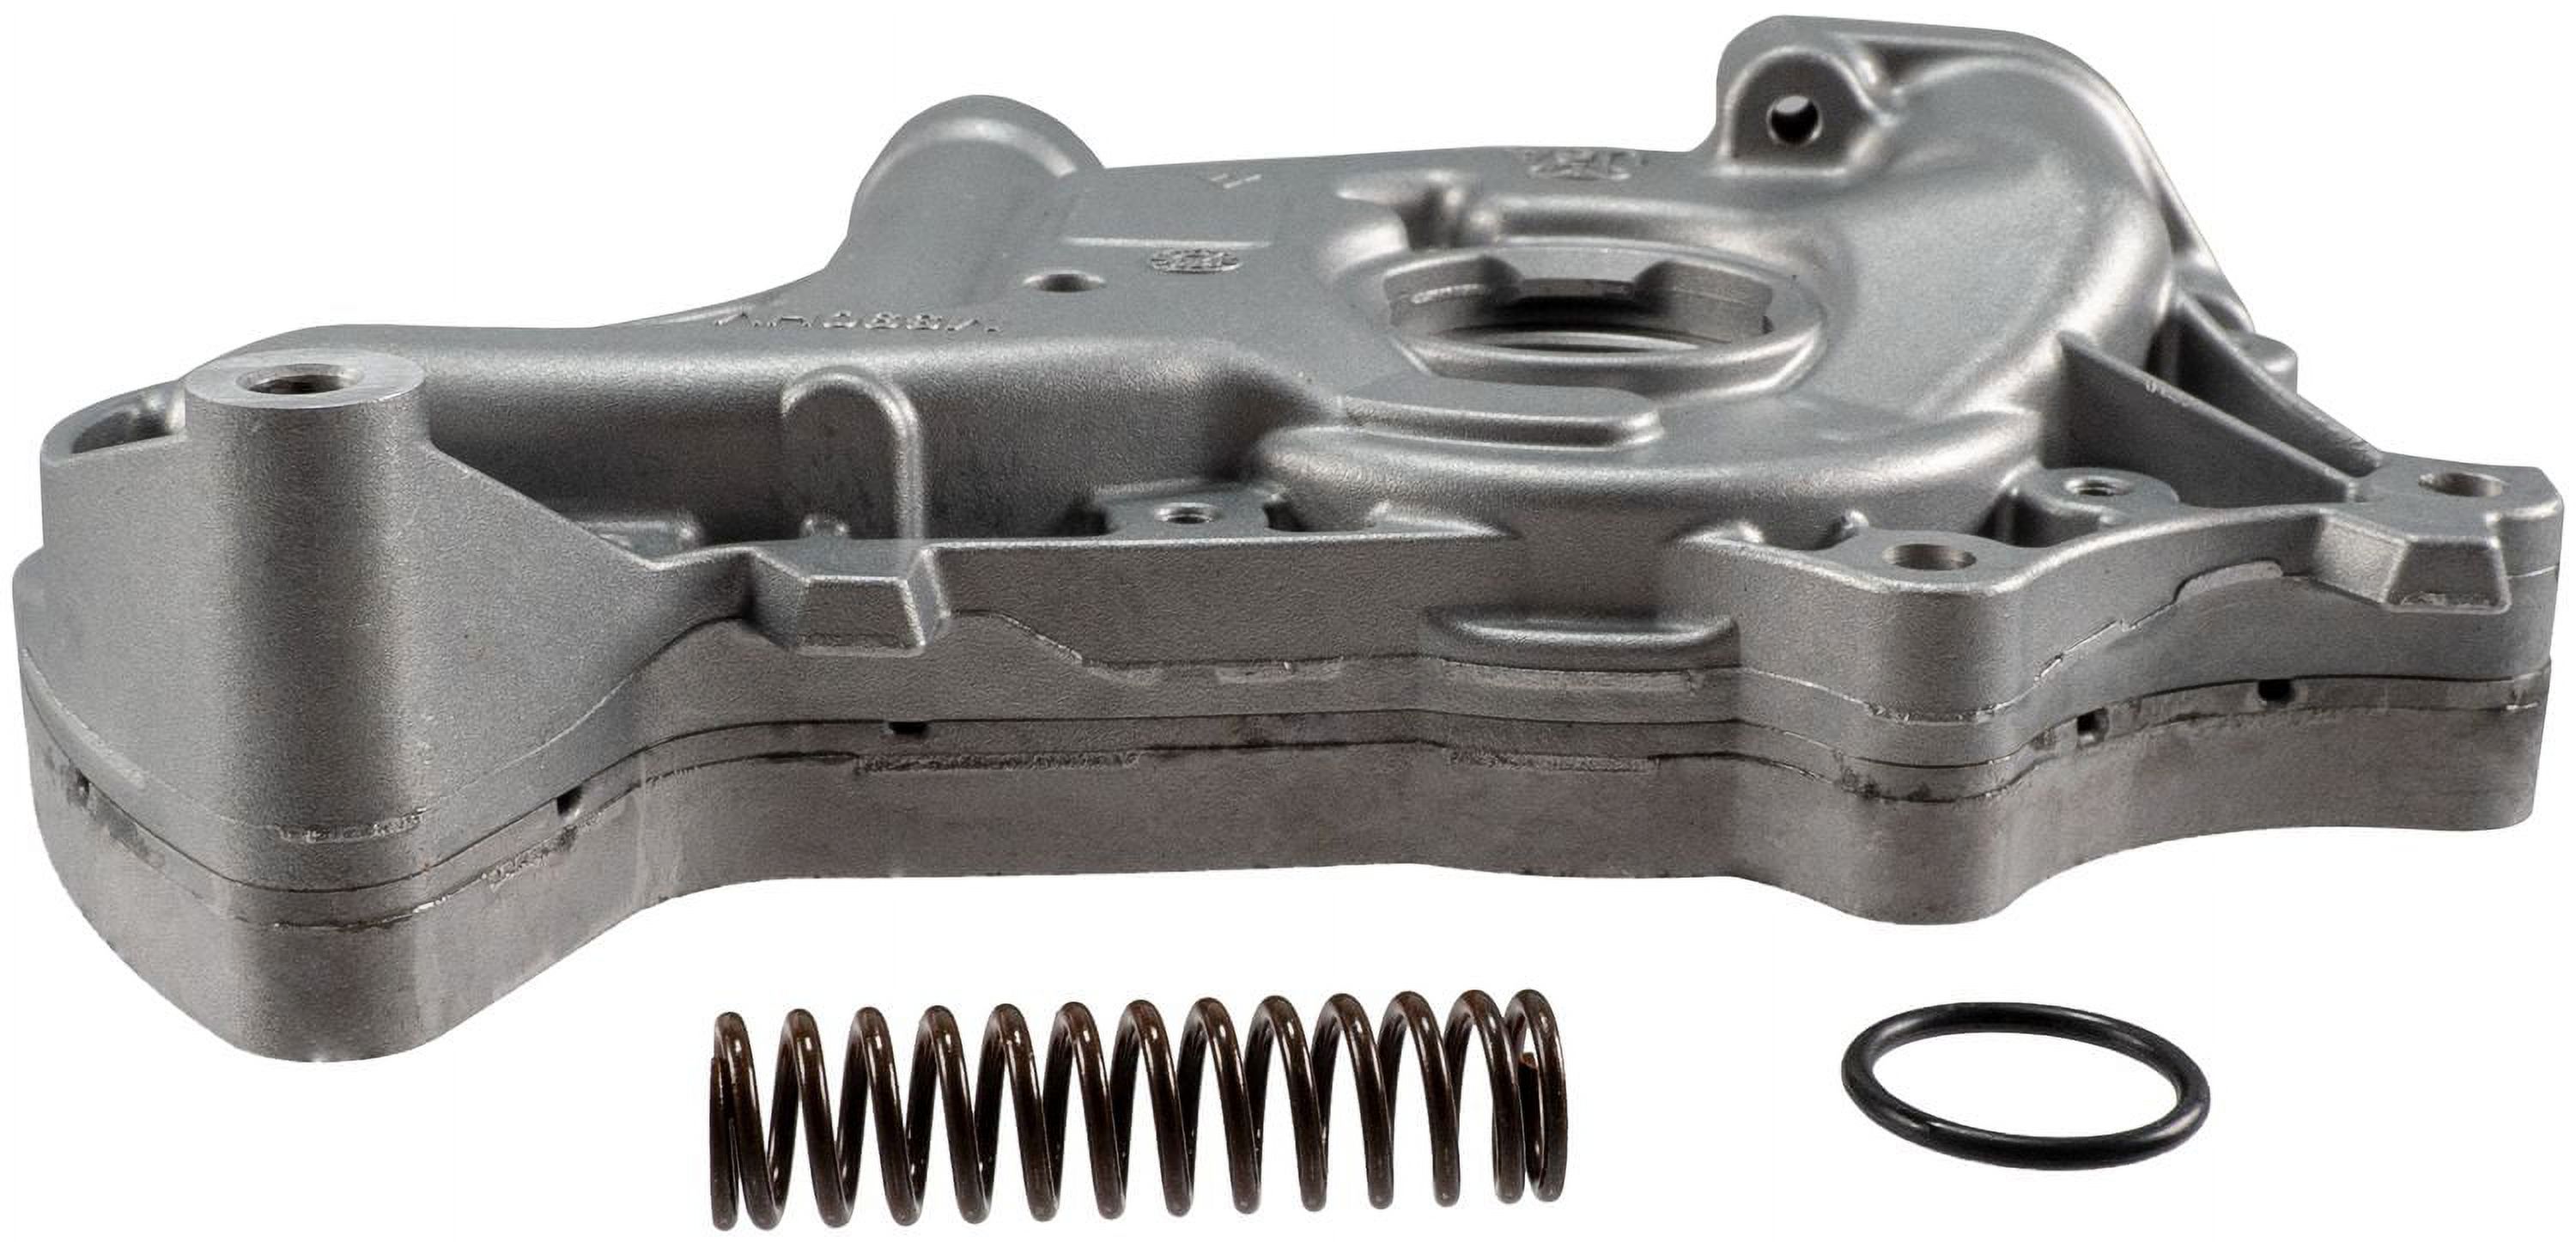 Melling M390HV Hi Volume Oil Pump 3.5 3.7 fits Various F150 Edge Explorer Expedition Fusion and others Fits select: 2011-2019 FORD EXPLORER, 2011-2017 FORD F150 - image 2 of 4